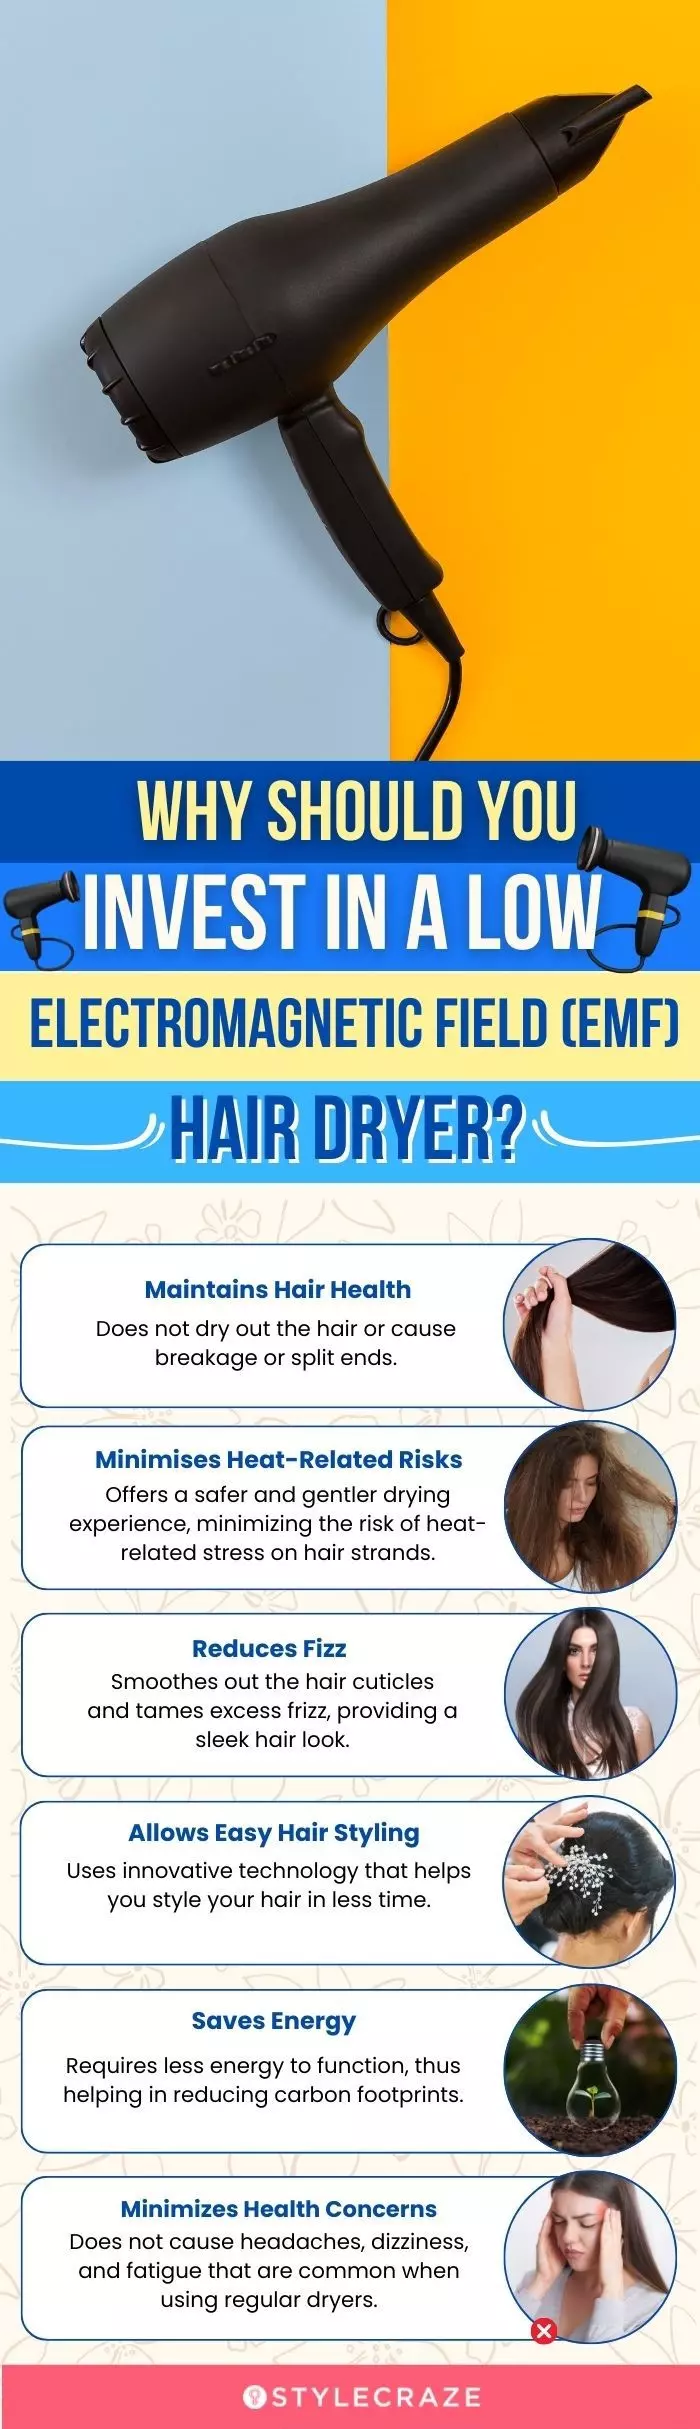 Why Should You Invest In A Low Electromagnetic Field (EMF) Hair Dryer? (infographic)